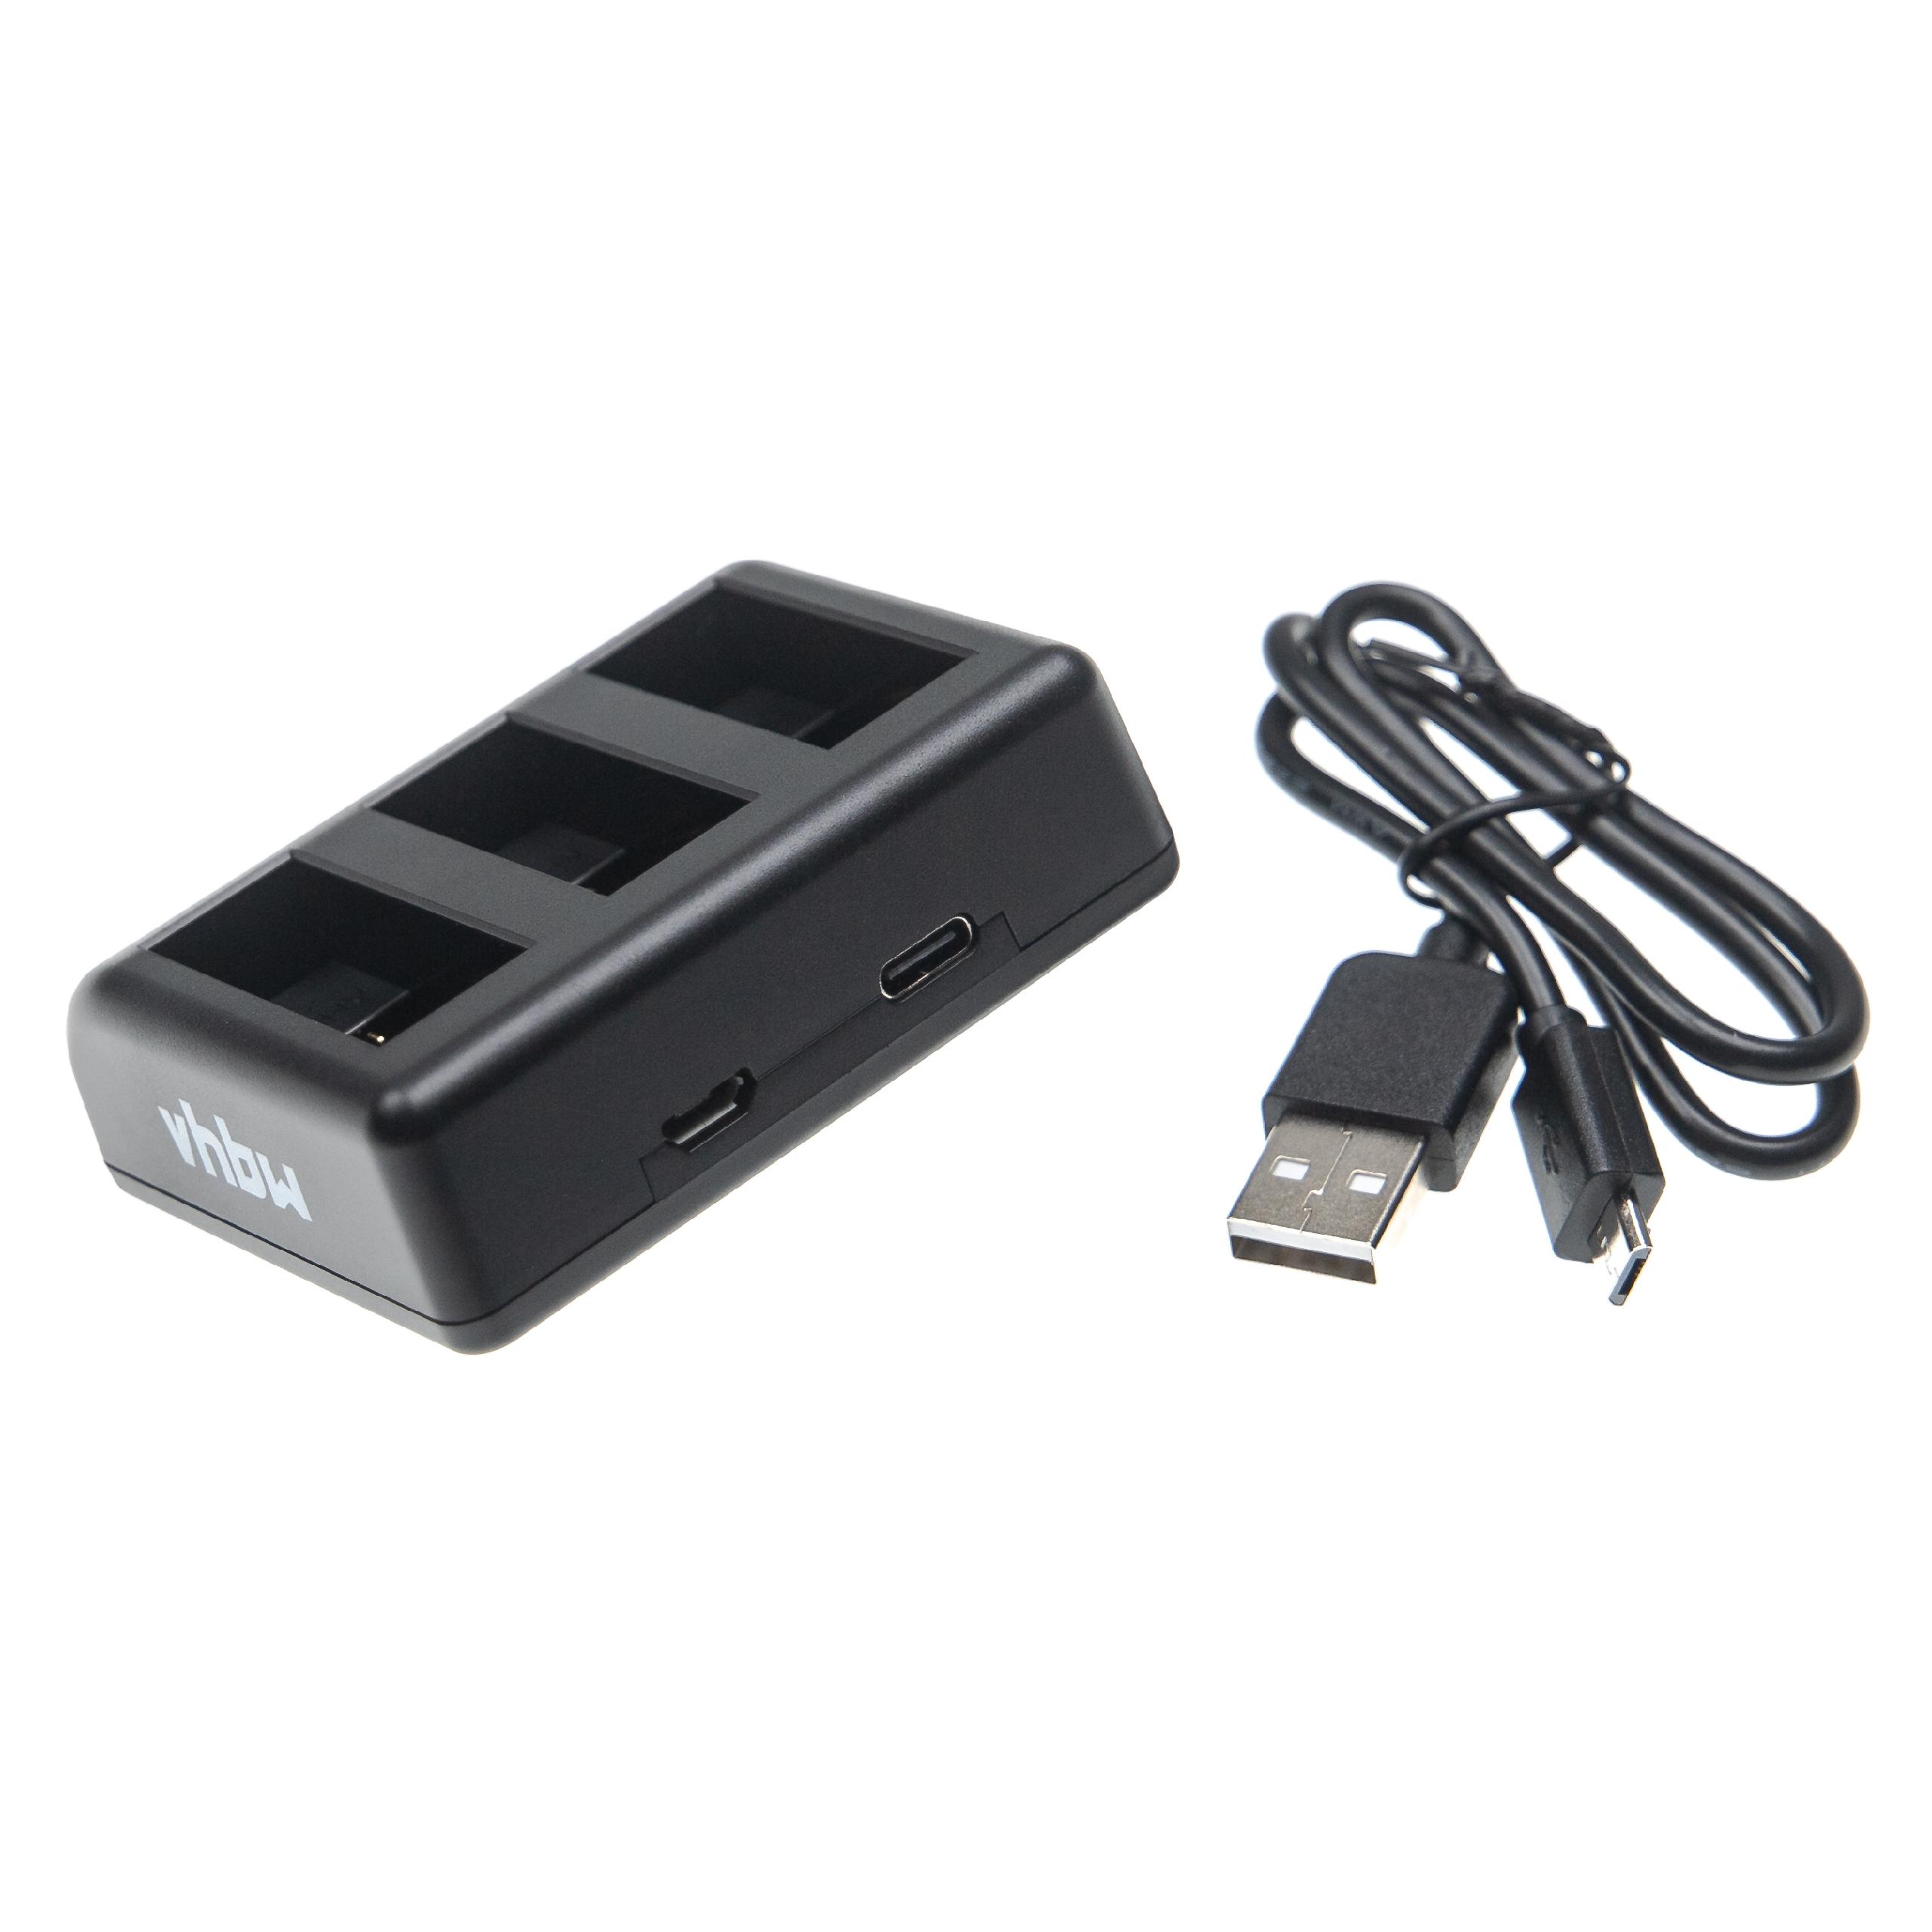 Battery Charger suitable for Hero 9 Camera etc. - 0.7 A, 4.4 V